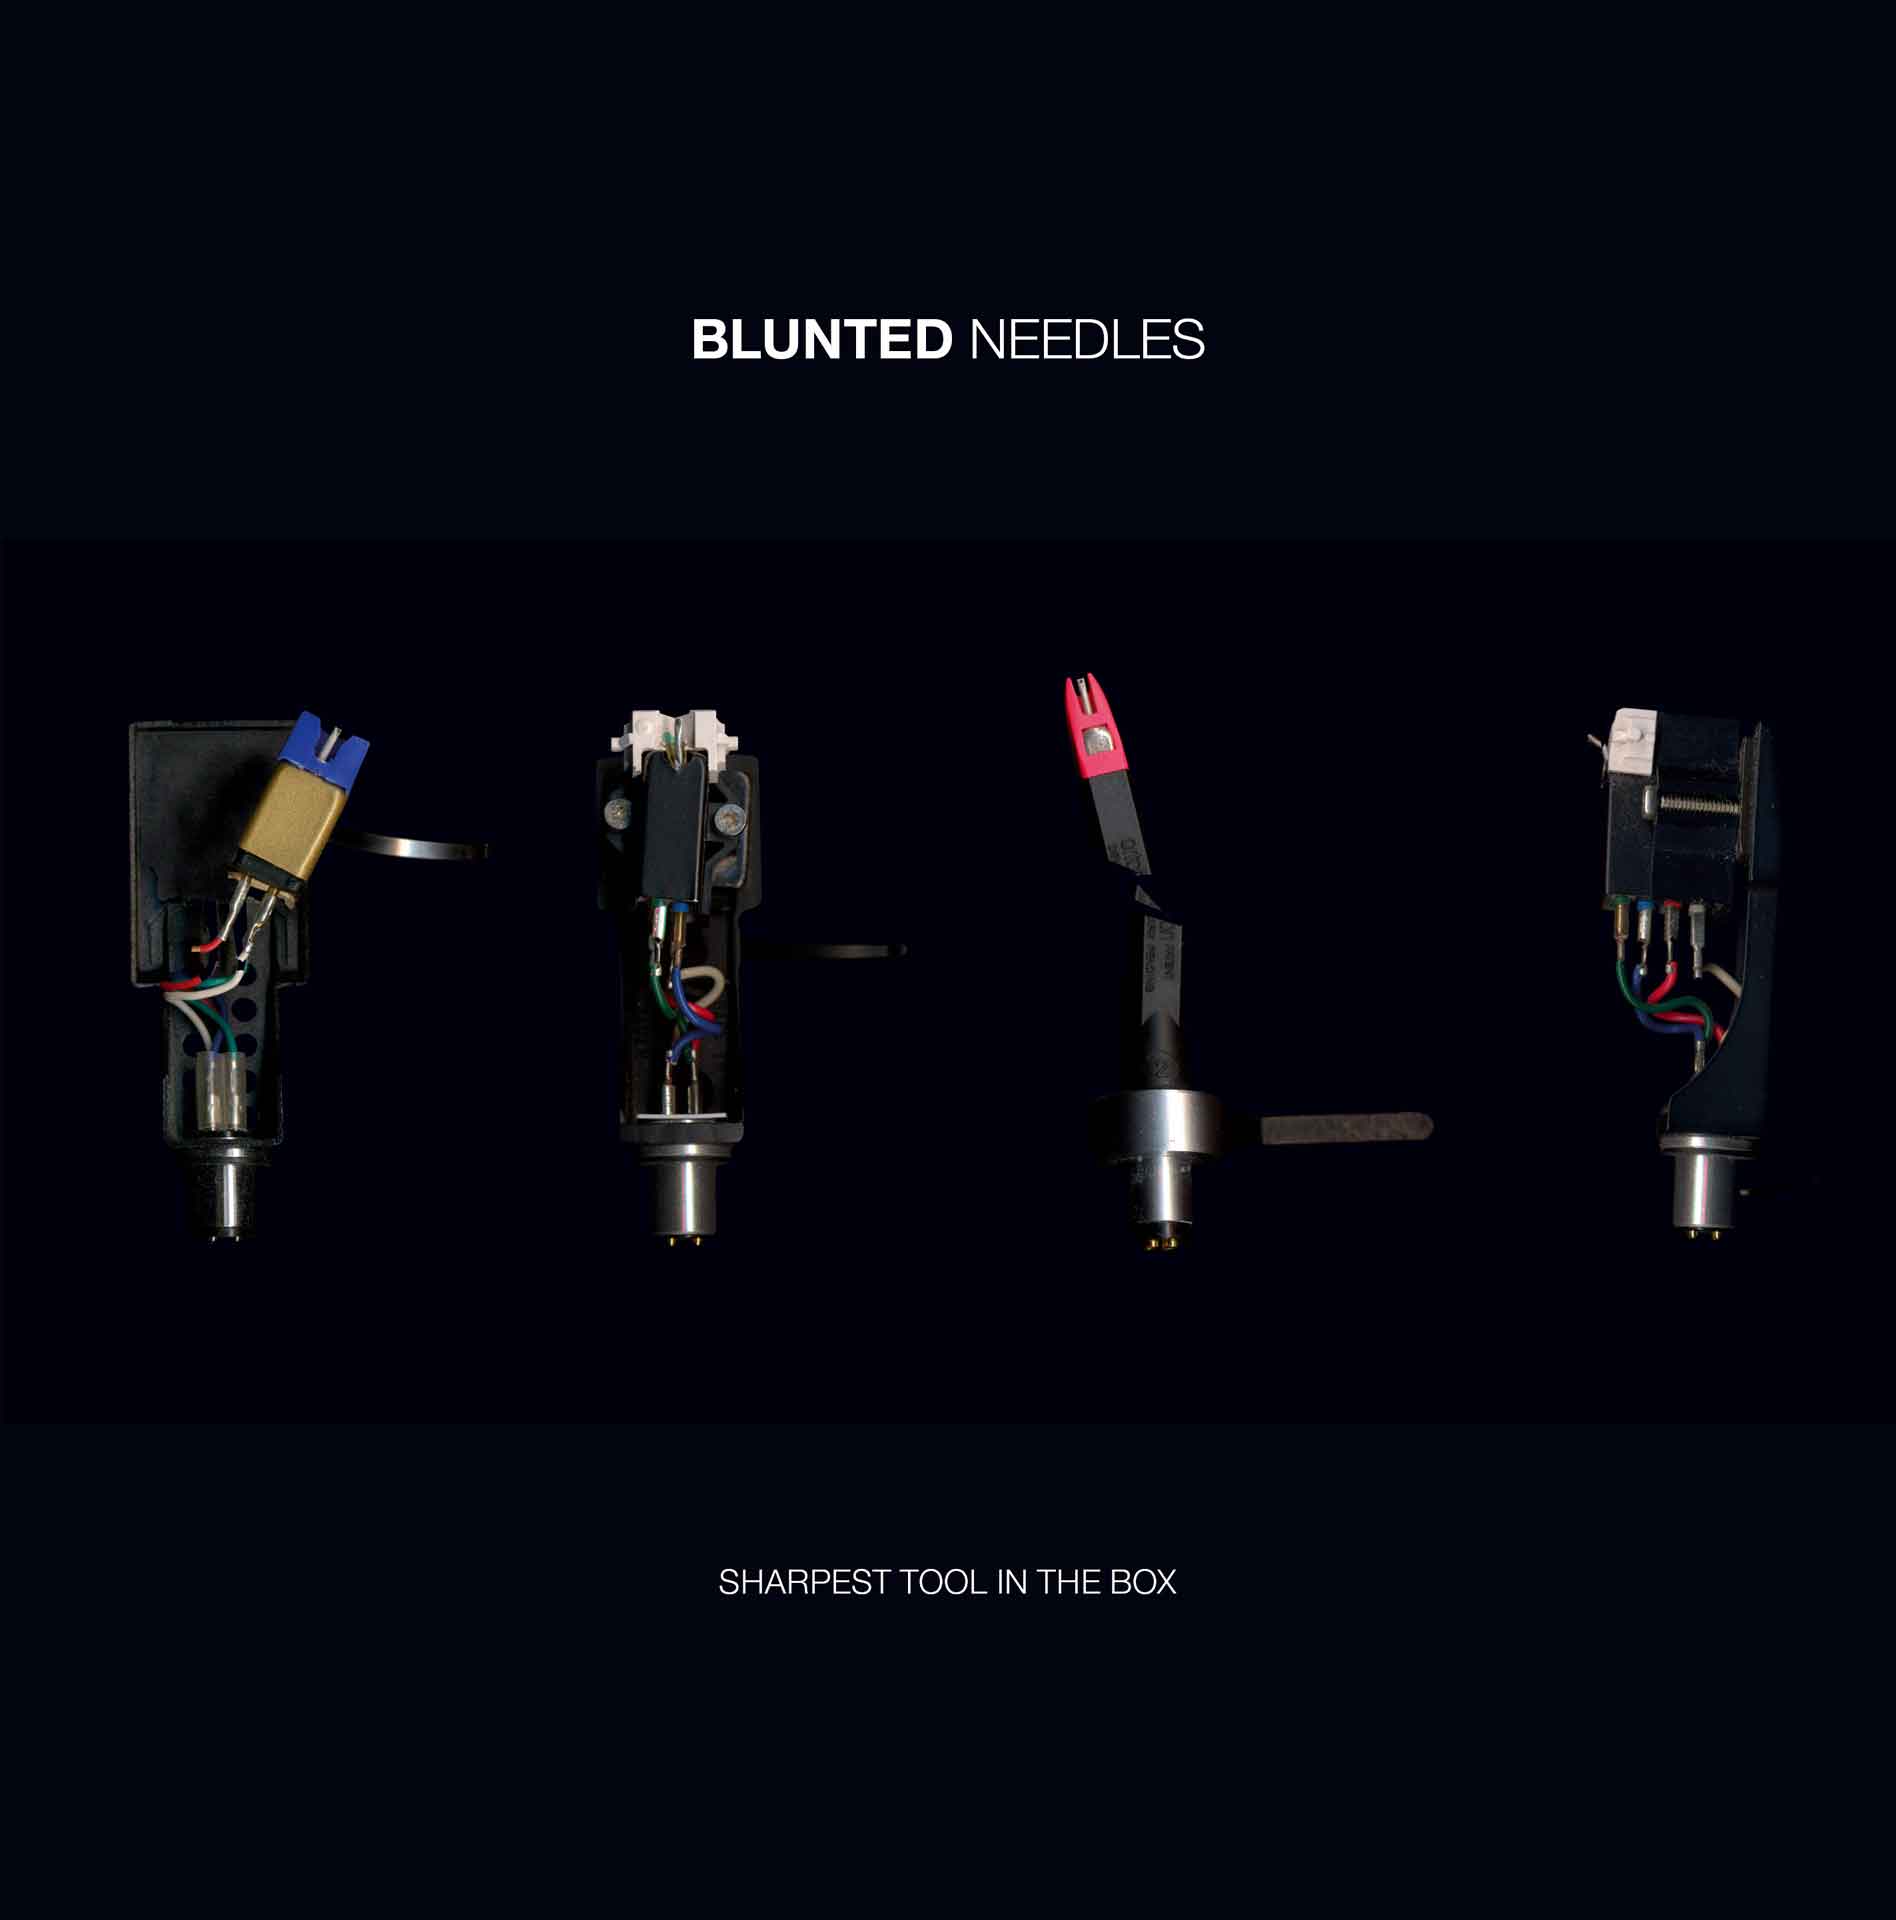 Design and art direction for Blunted Needles' album Sharpest Tool in the Box.